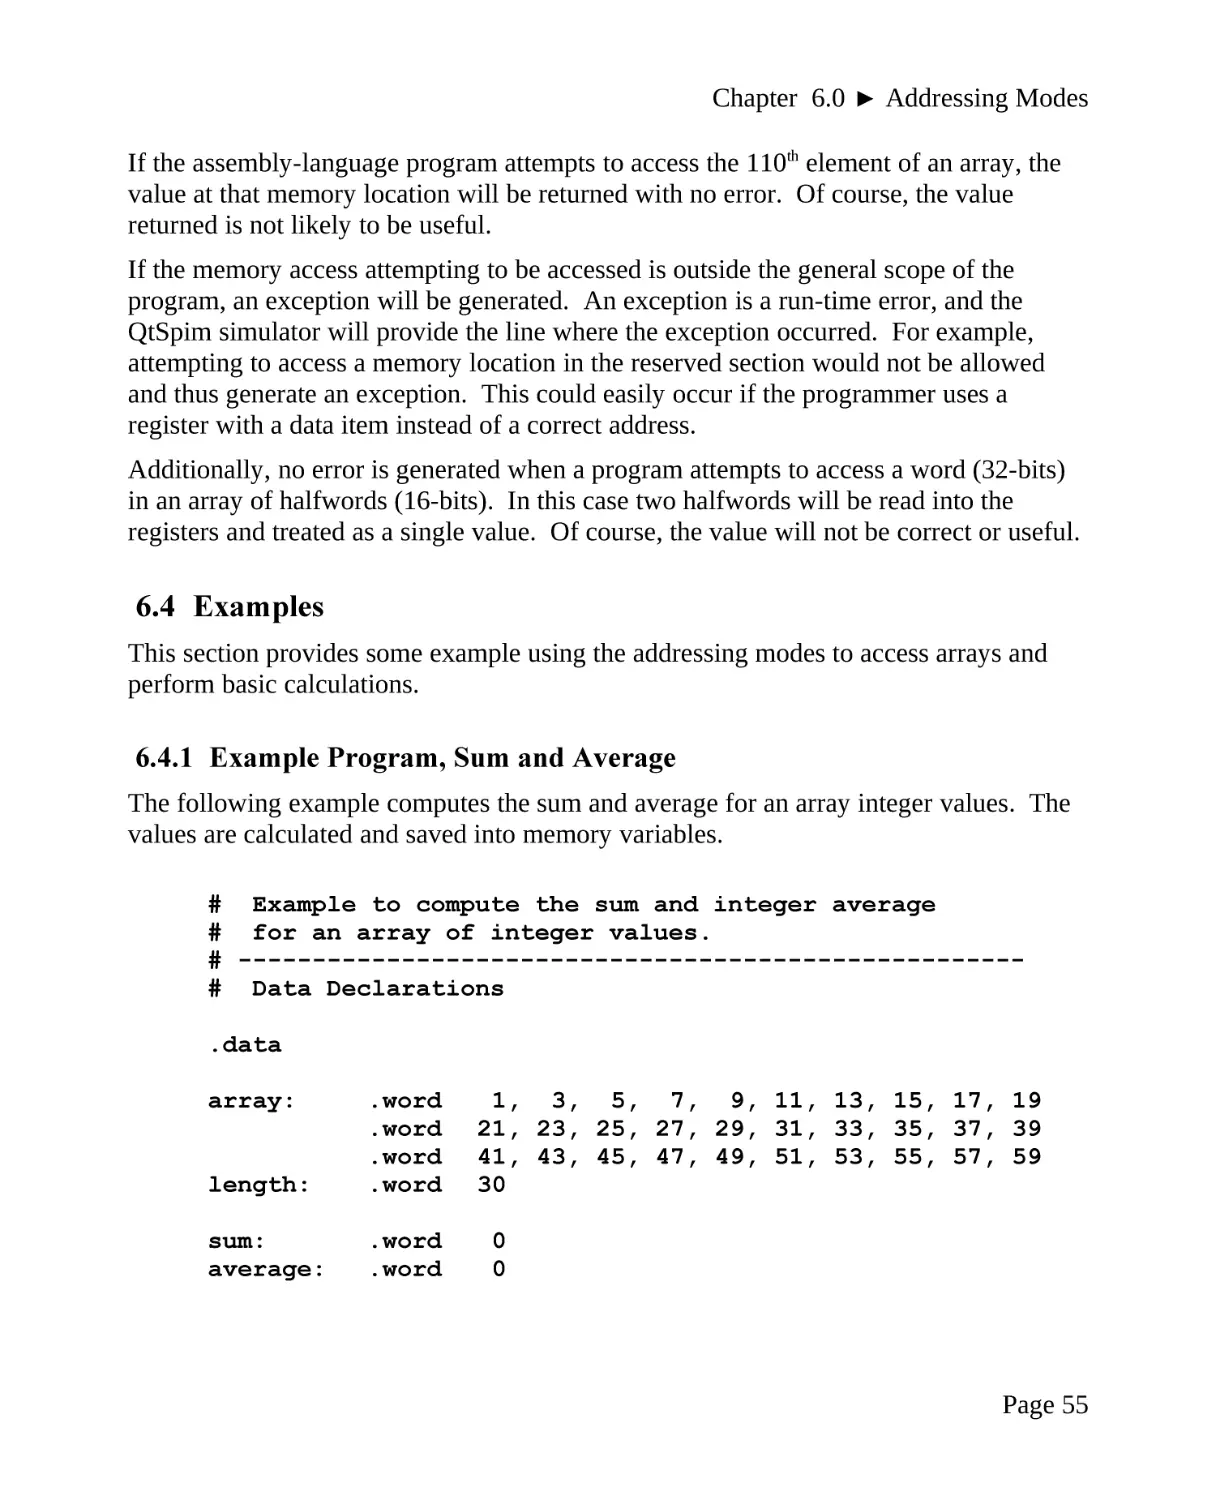 6.4 Examples
6.4.1 Example Program, Sum and Average